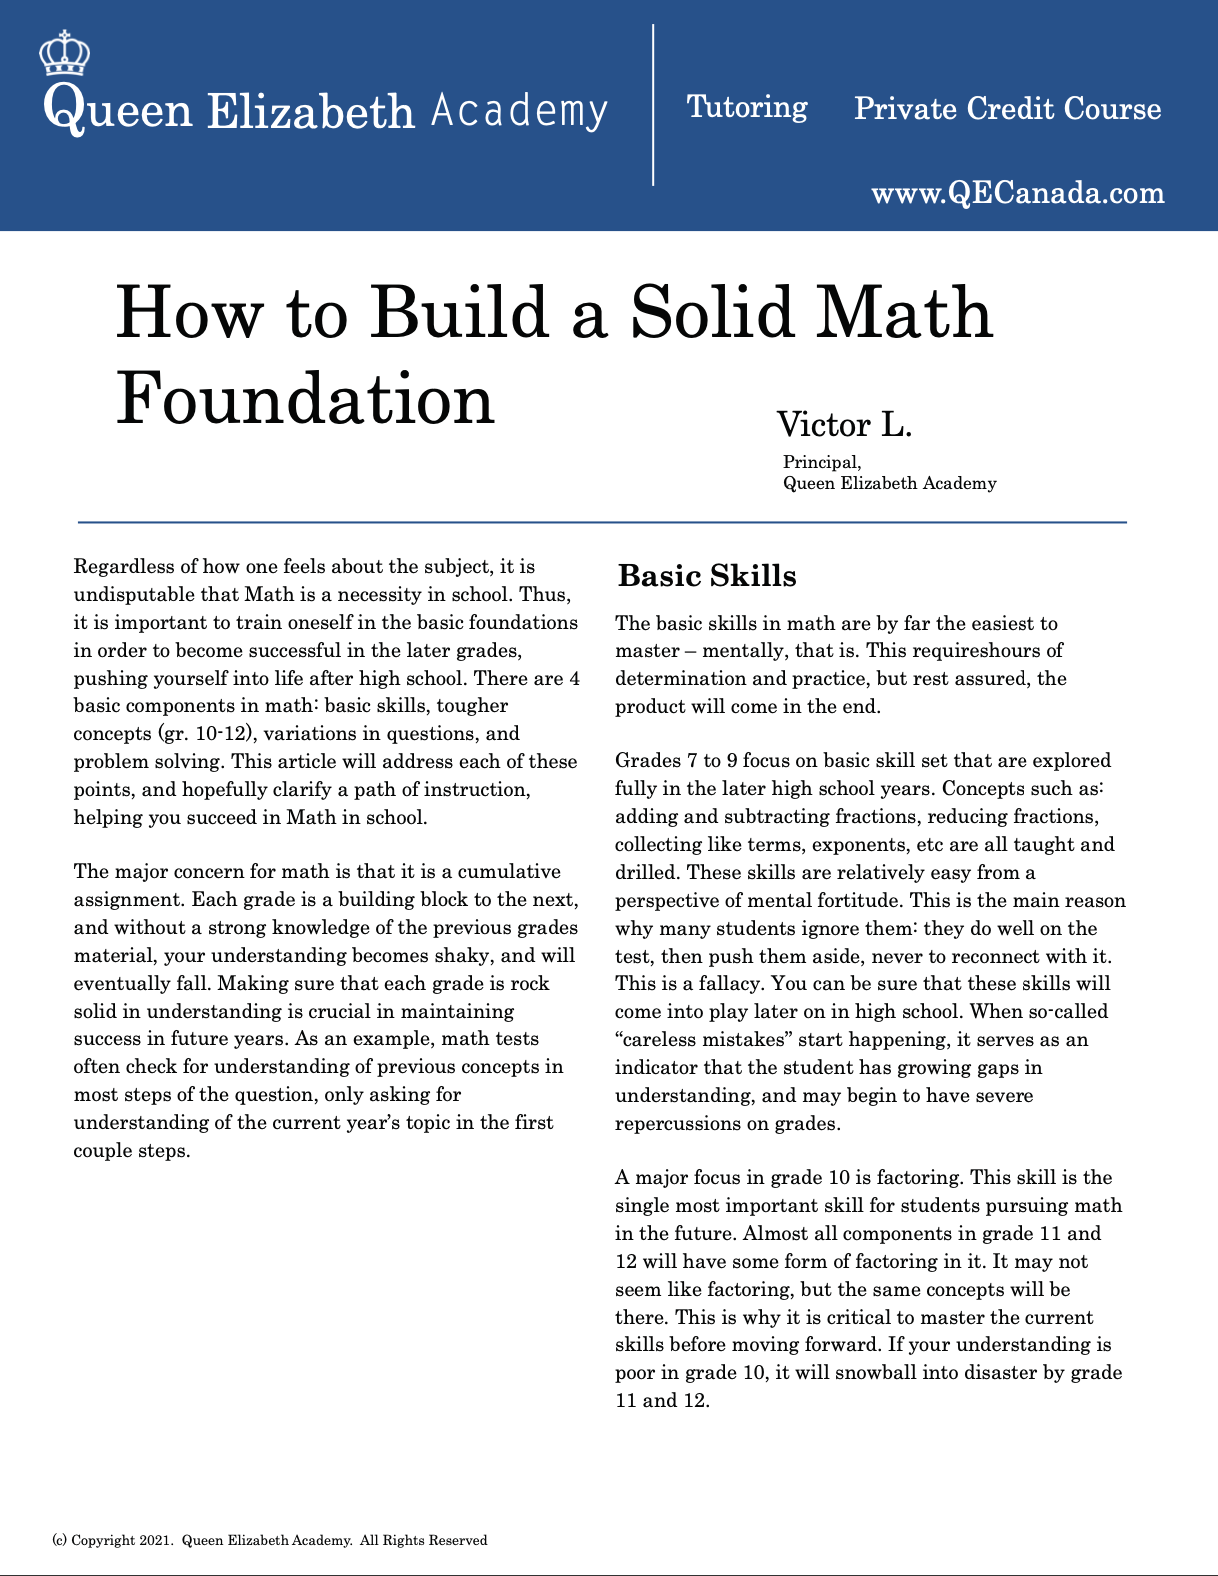 How to Build a Solid Math Foundation